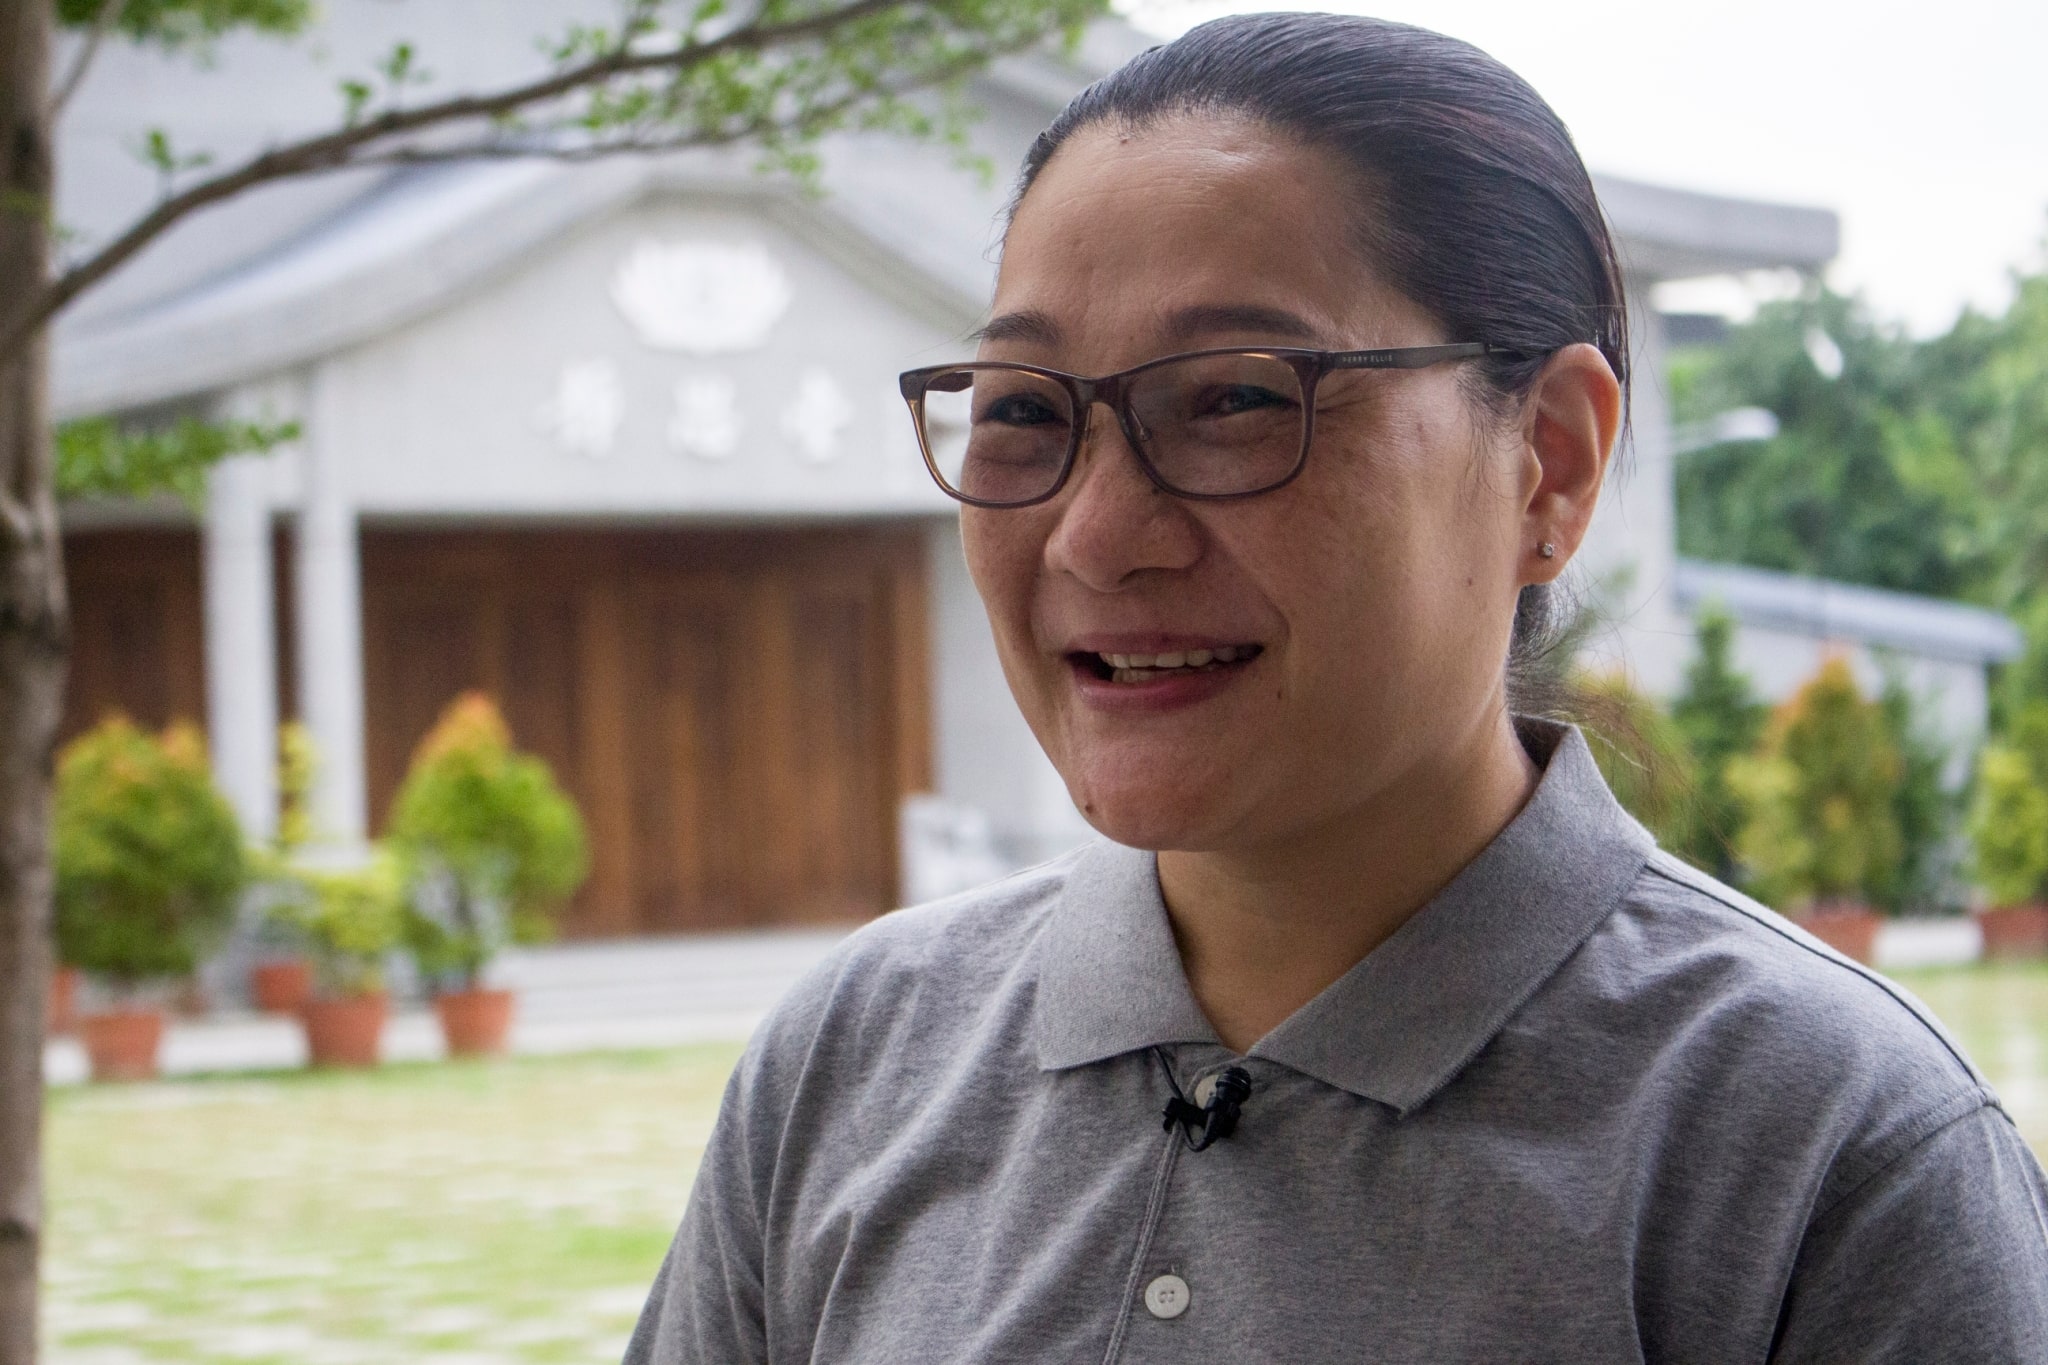 Wang Shang Ling flew in from Zamboanga to attend the day-long training classes. “When I’m in Tzu Chi, I feel so light,” says Wang, a donor for the past 10 years. 【Photo by Matt Serrano】